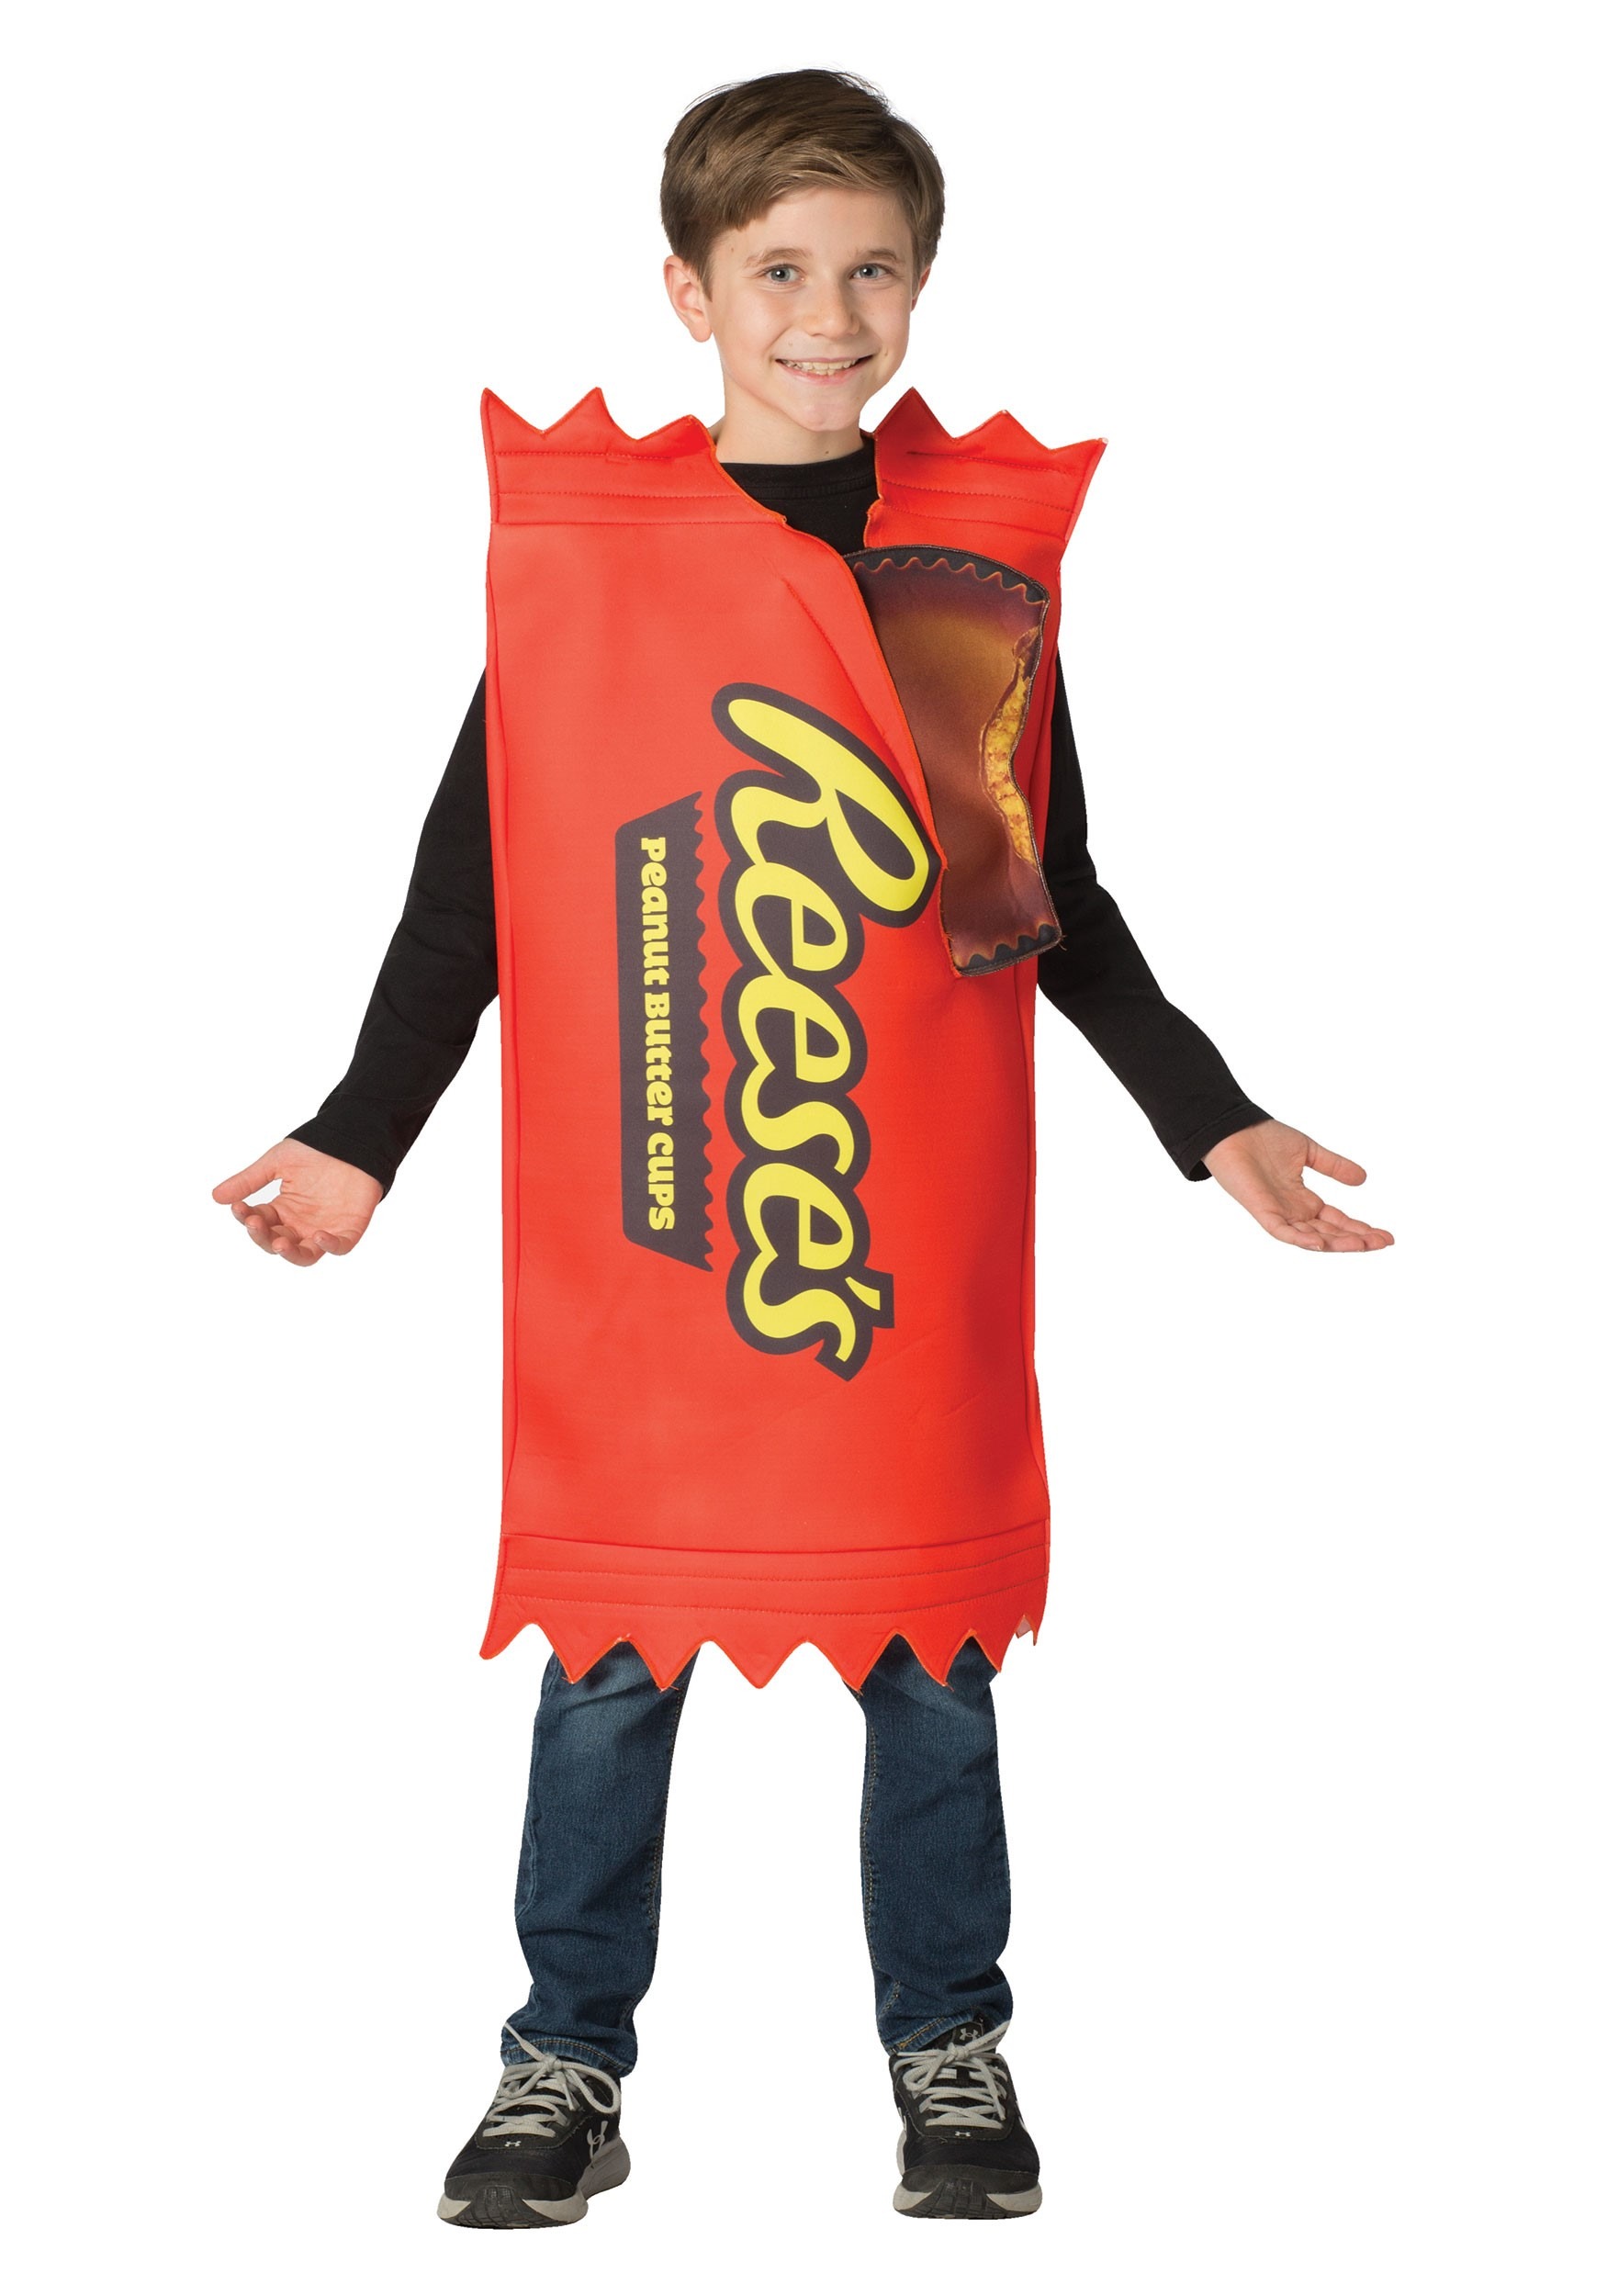 Reese's Cup 2-Pack Kids Costume by Reese's